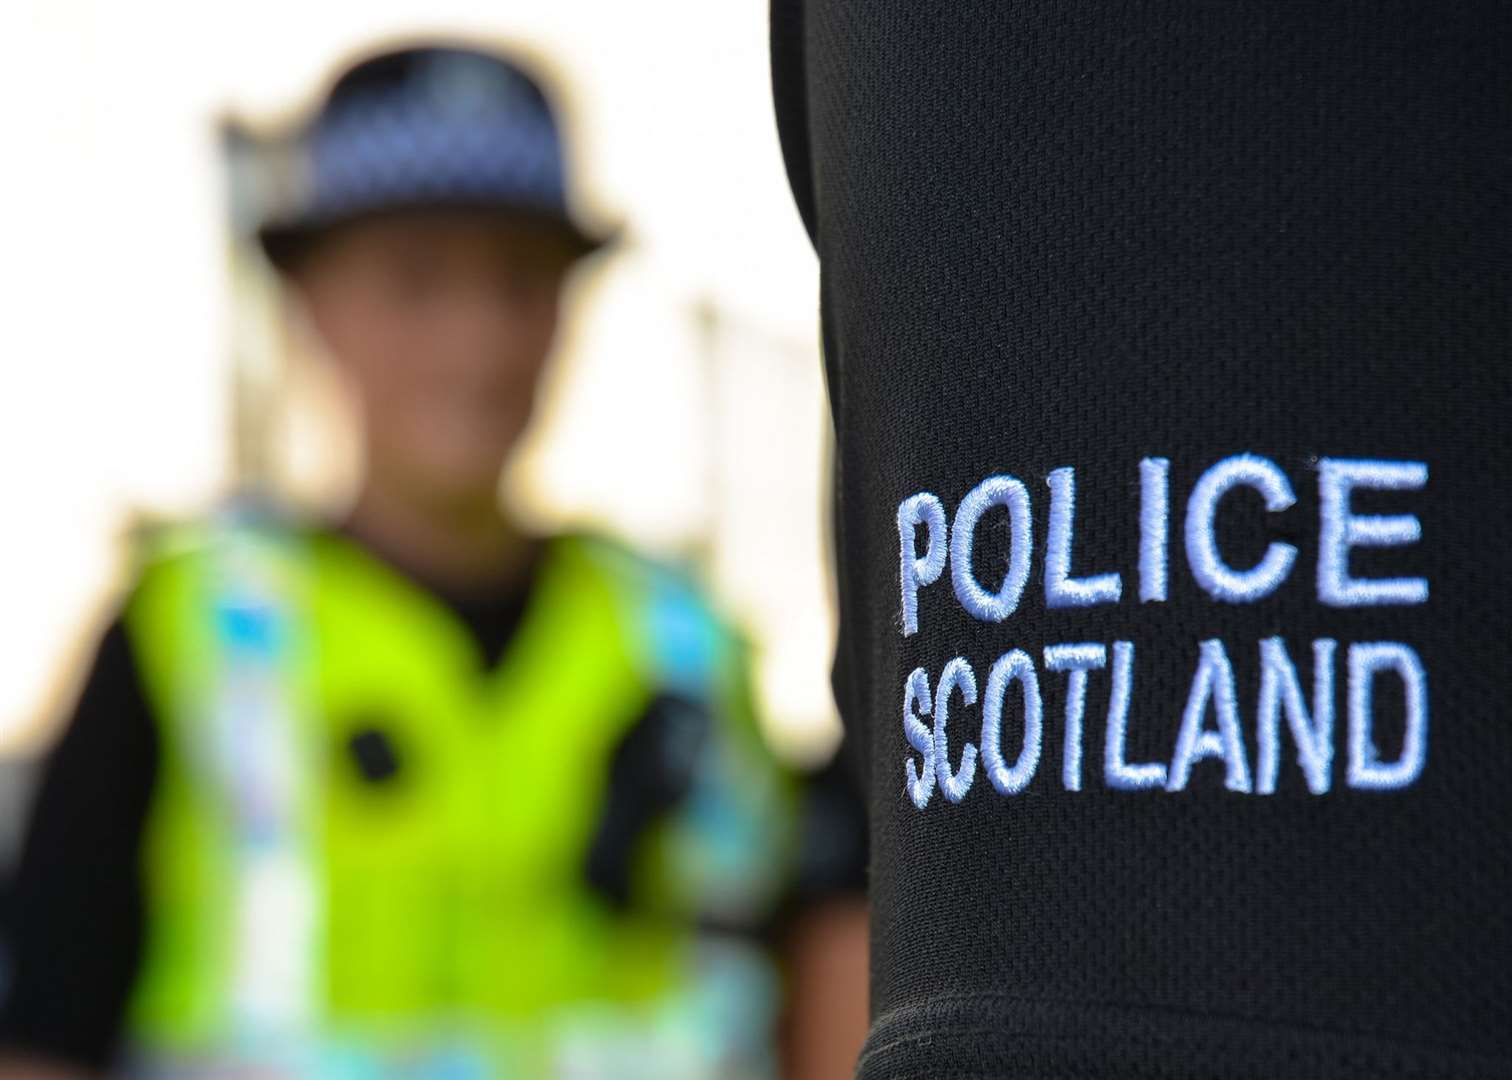 Police are appealing for information. Picture: Police Scotland Facebook.